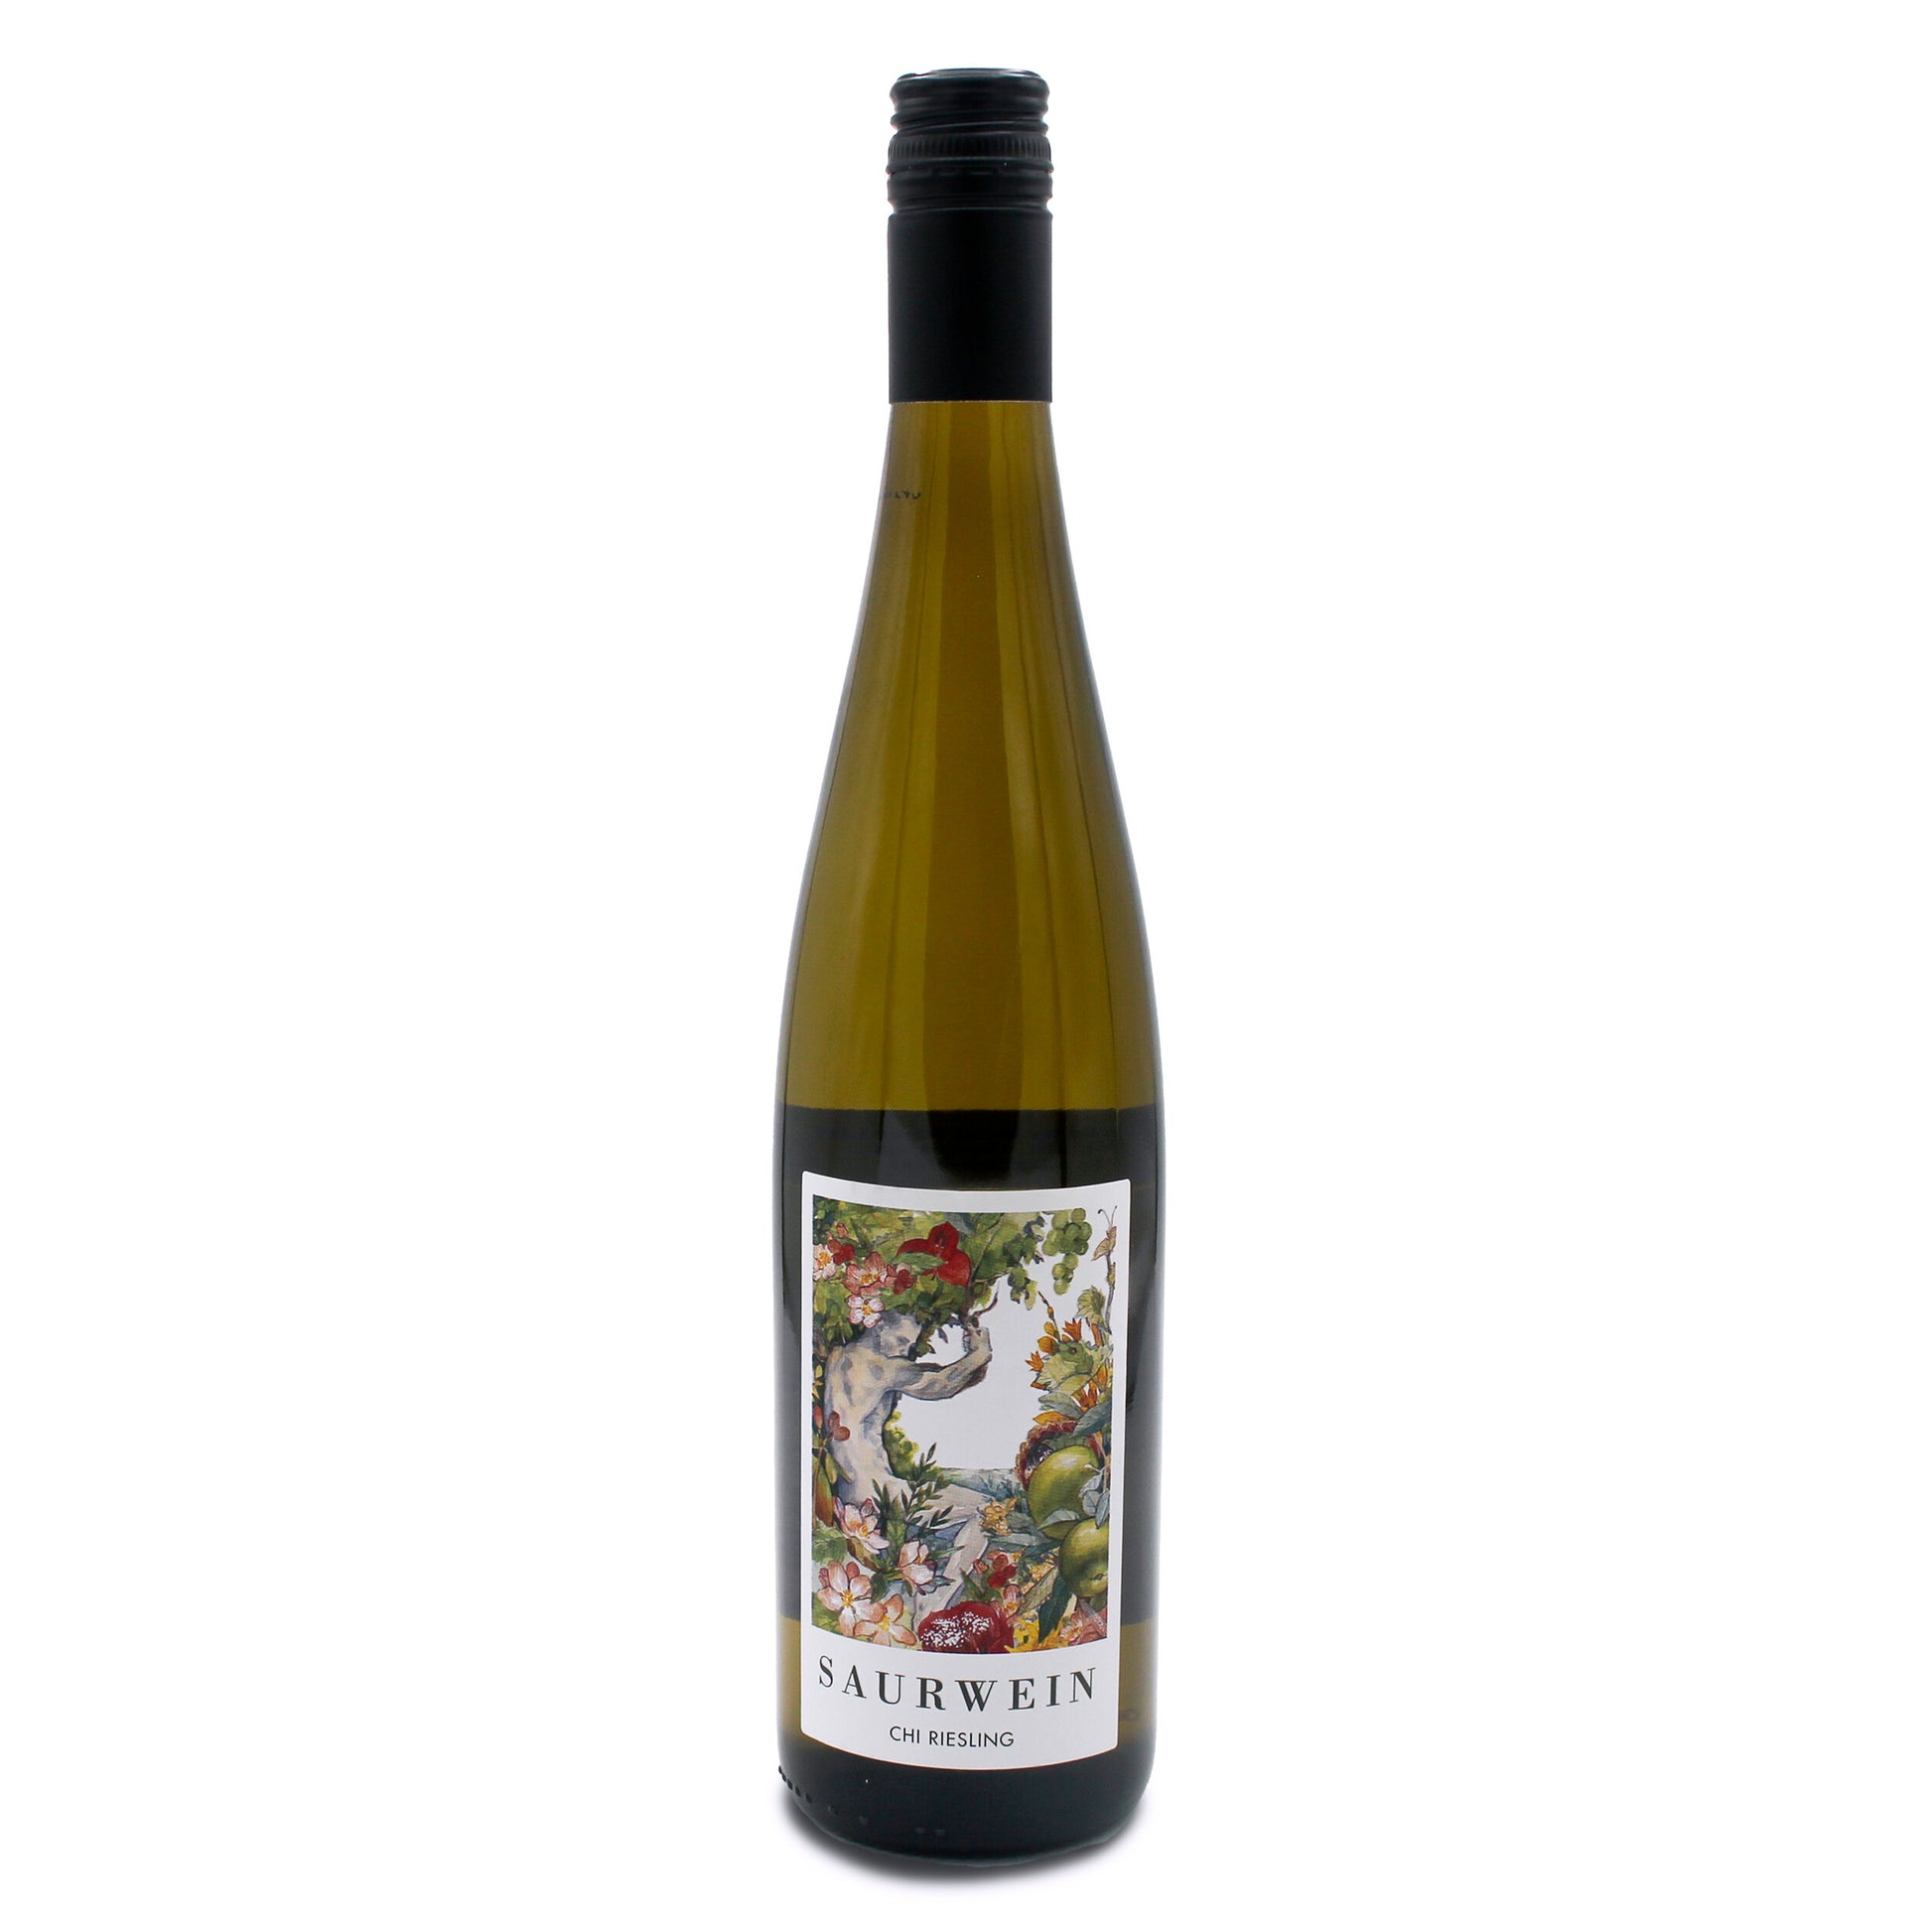 Saurwein Chi Riesling, South Africa 2020